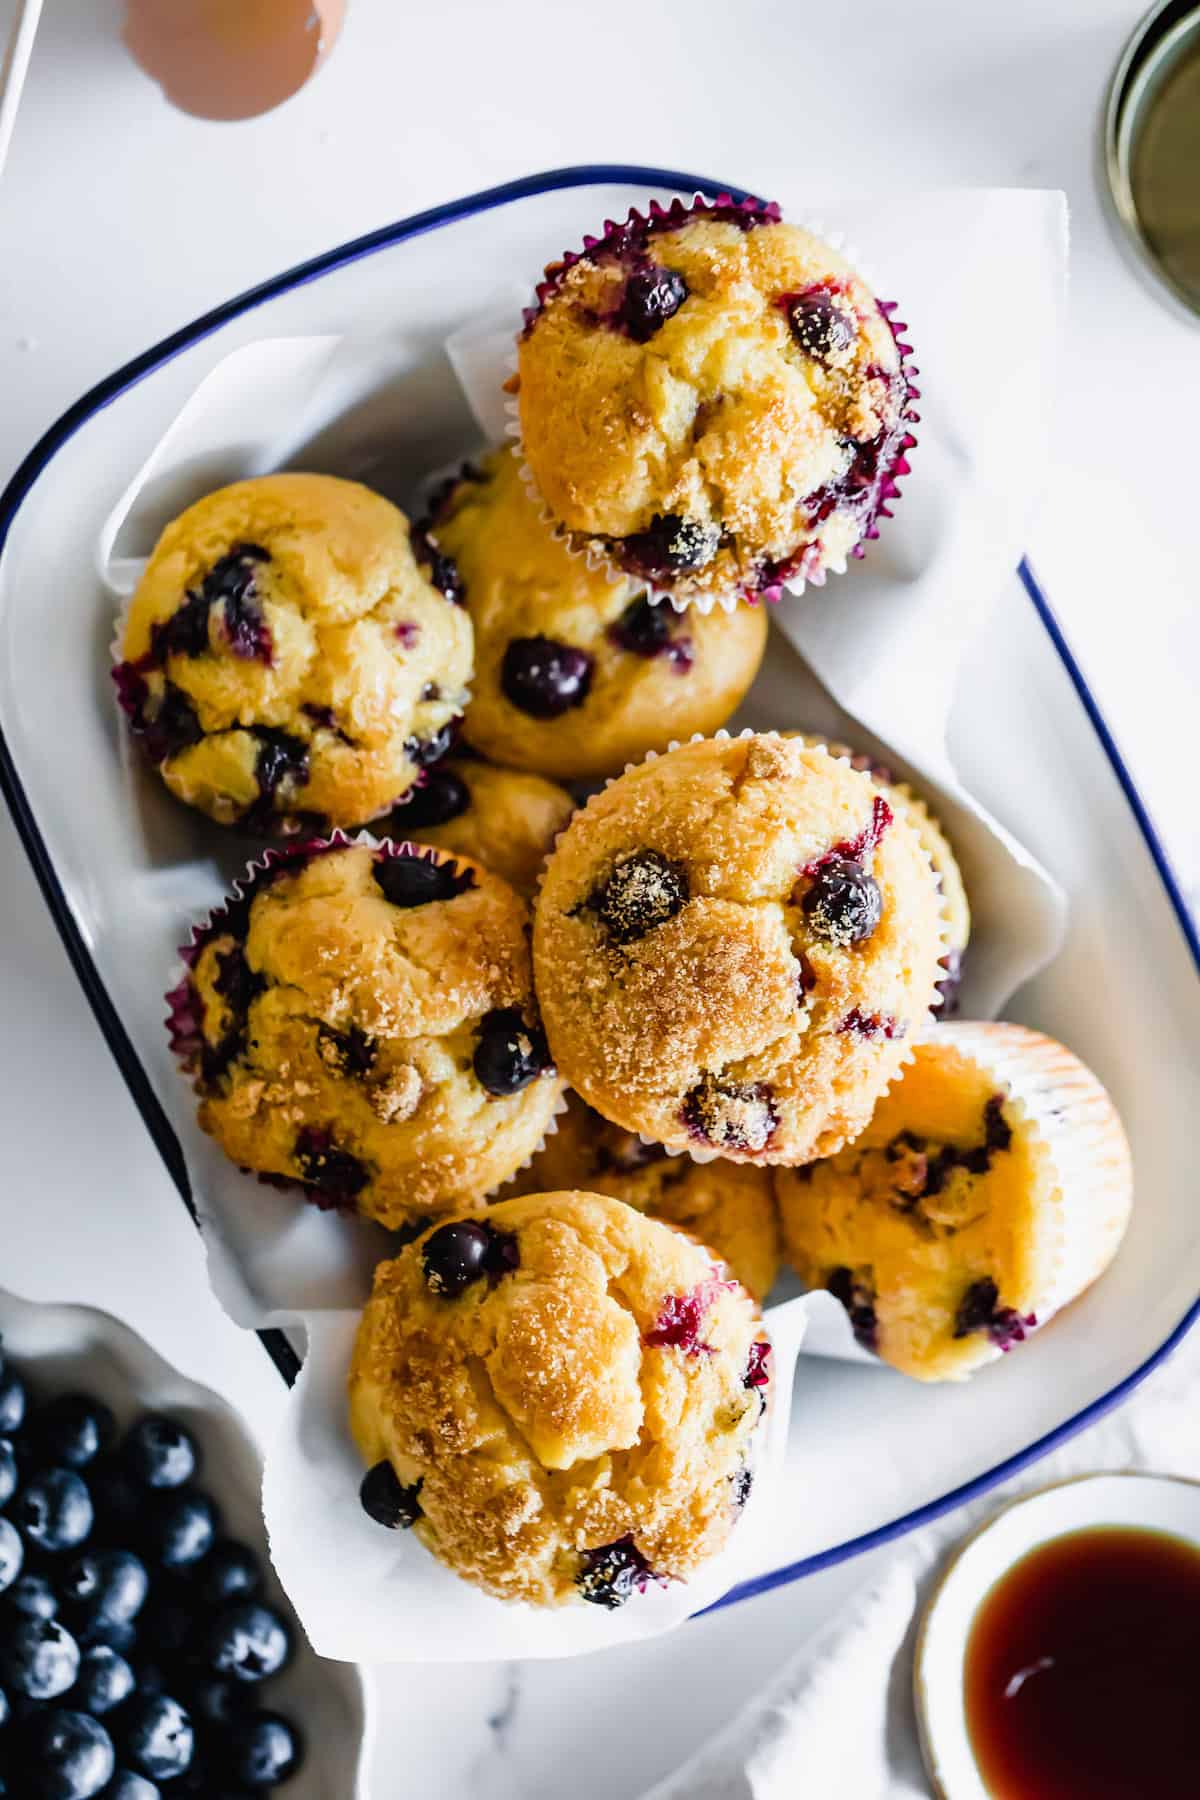 A Bird's-Eye View of a Dish of Blueberry Muffins on a Countertop with a Bowl of Fresh Berries